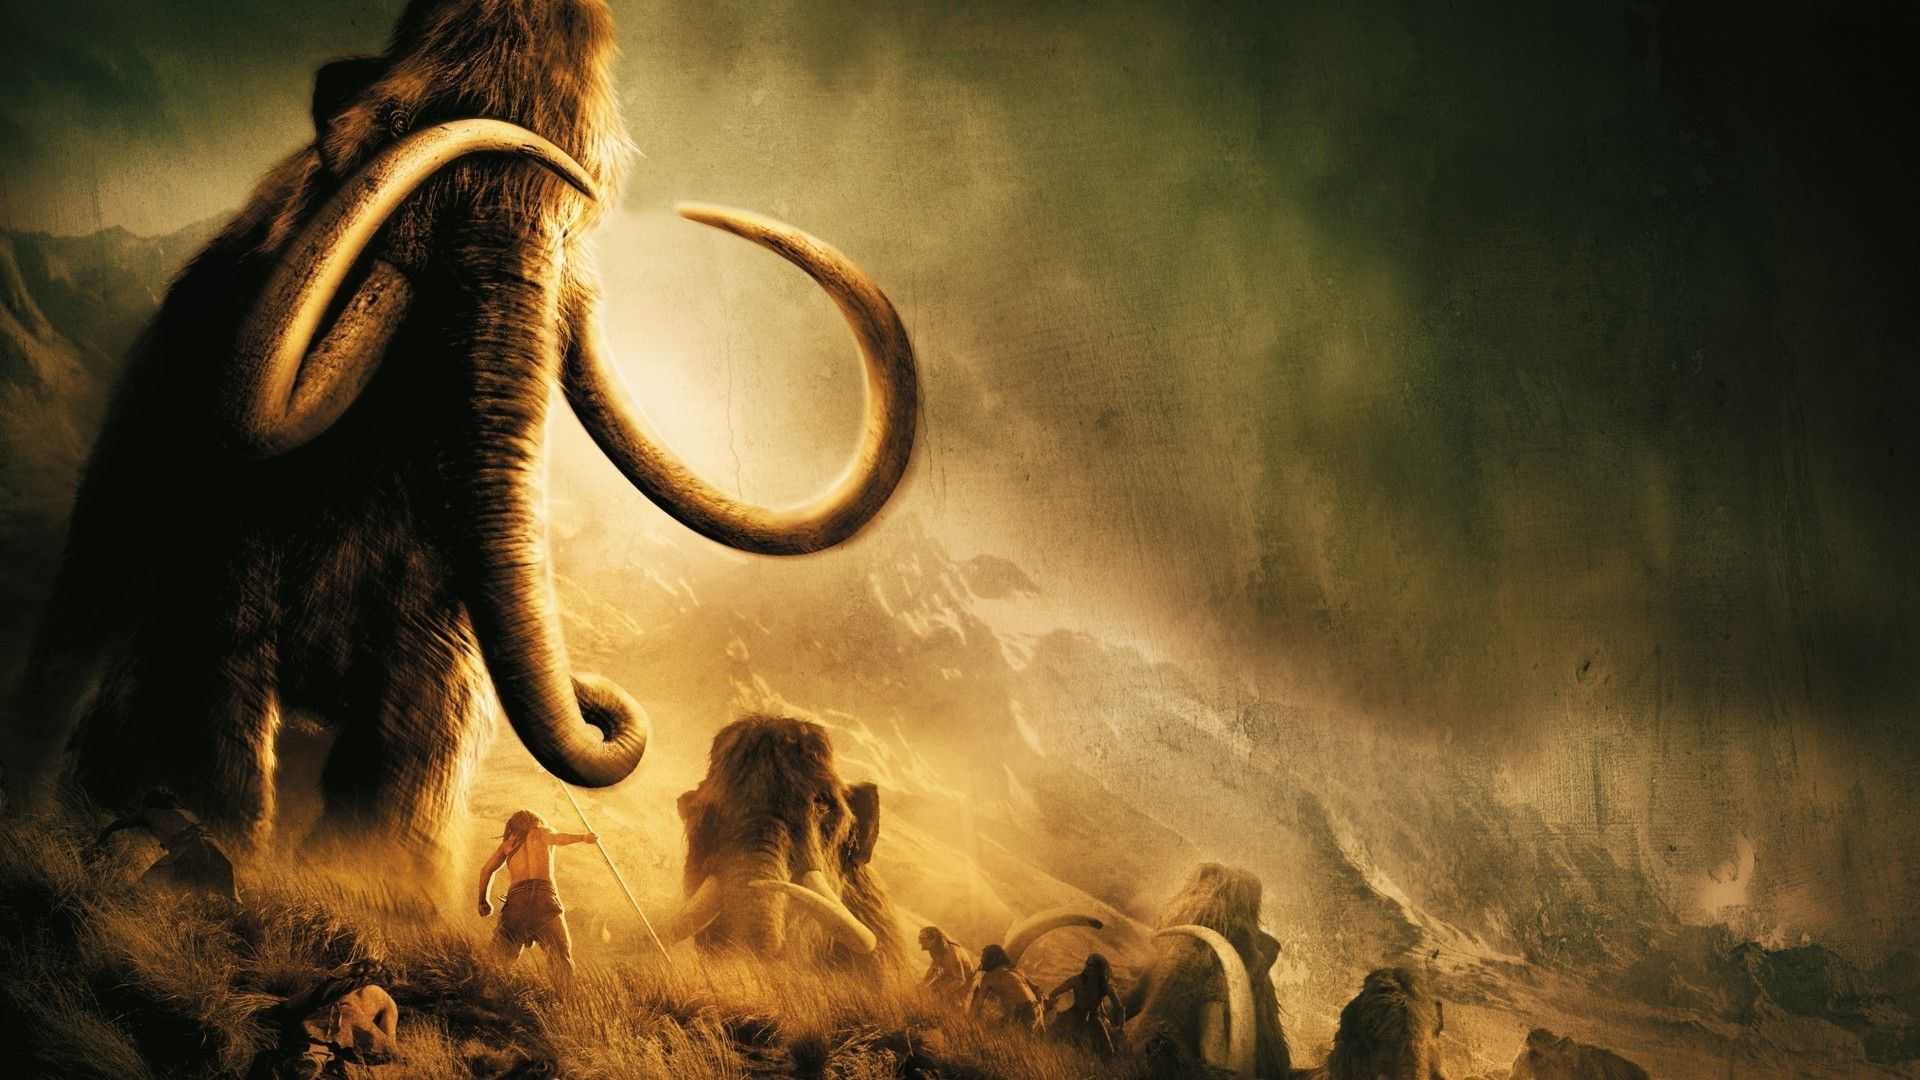 Desktop Wallpaper 000 Bc Movie, 2008 Movie, Mammoth, HD Image, Picture, Background, Fqmbld